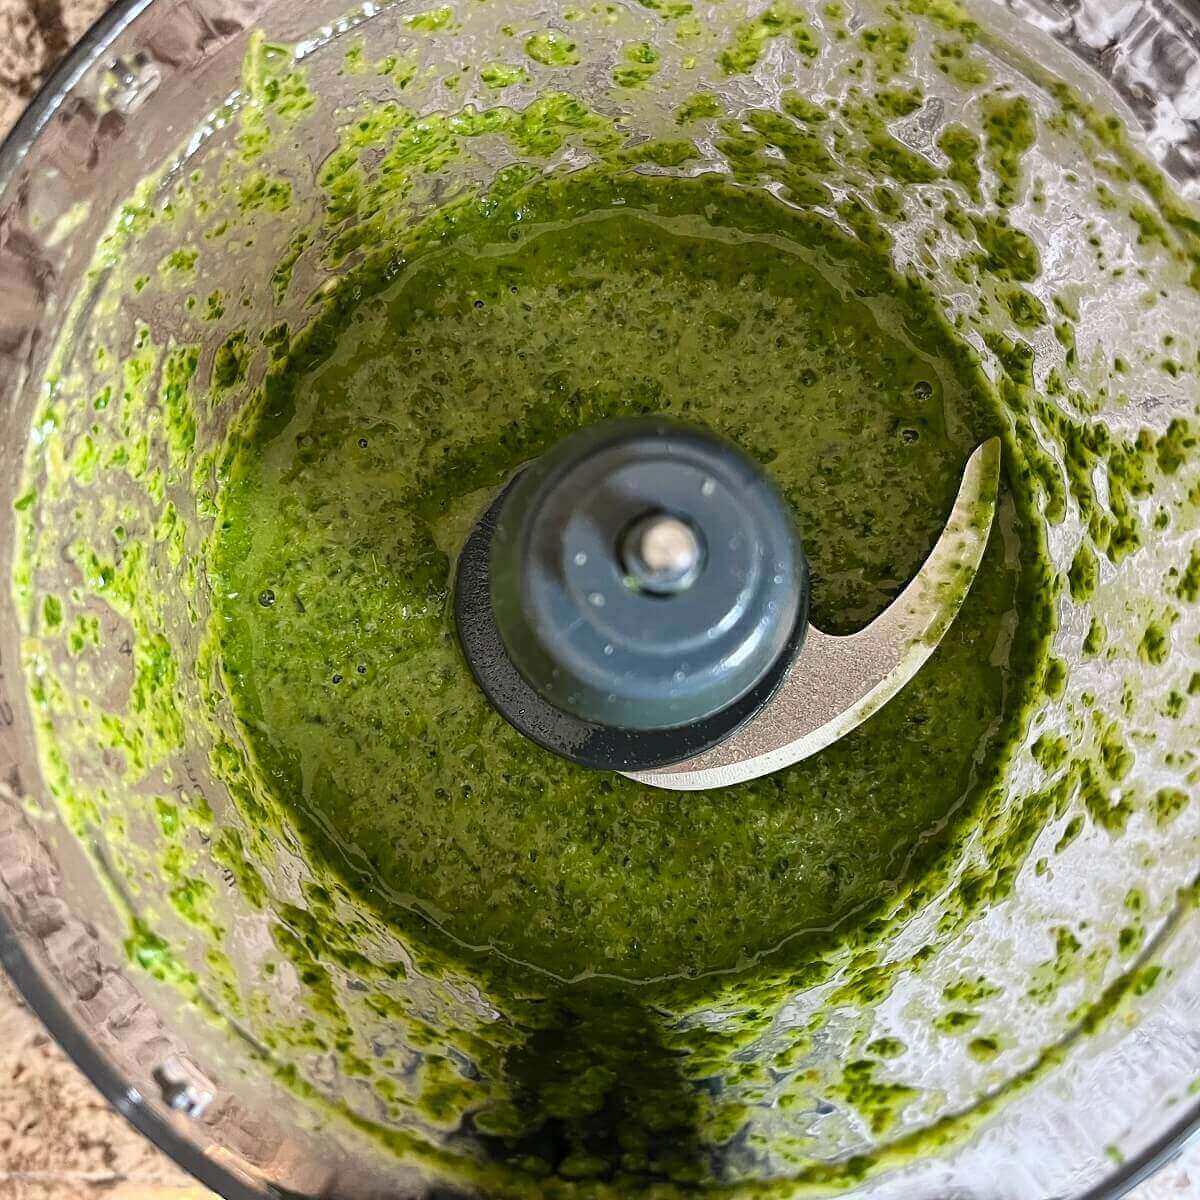 Blended green sauce in a food processor.